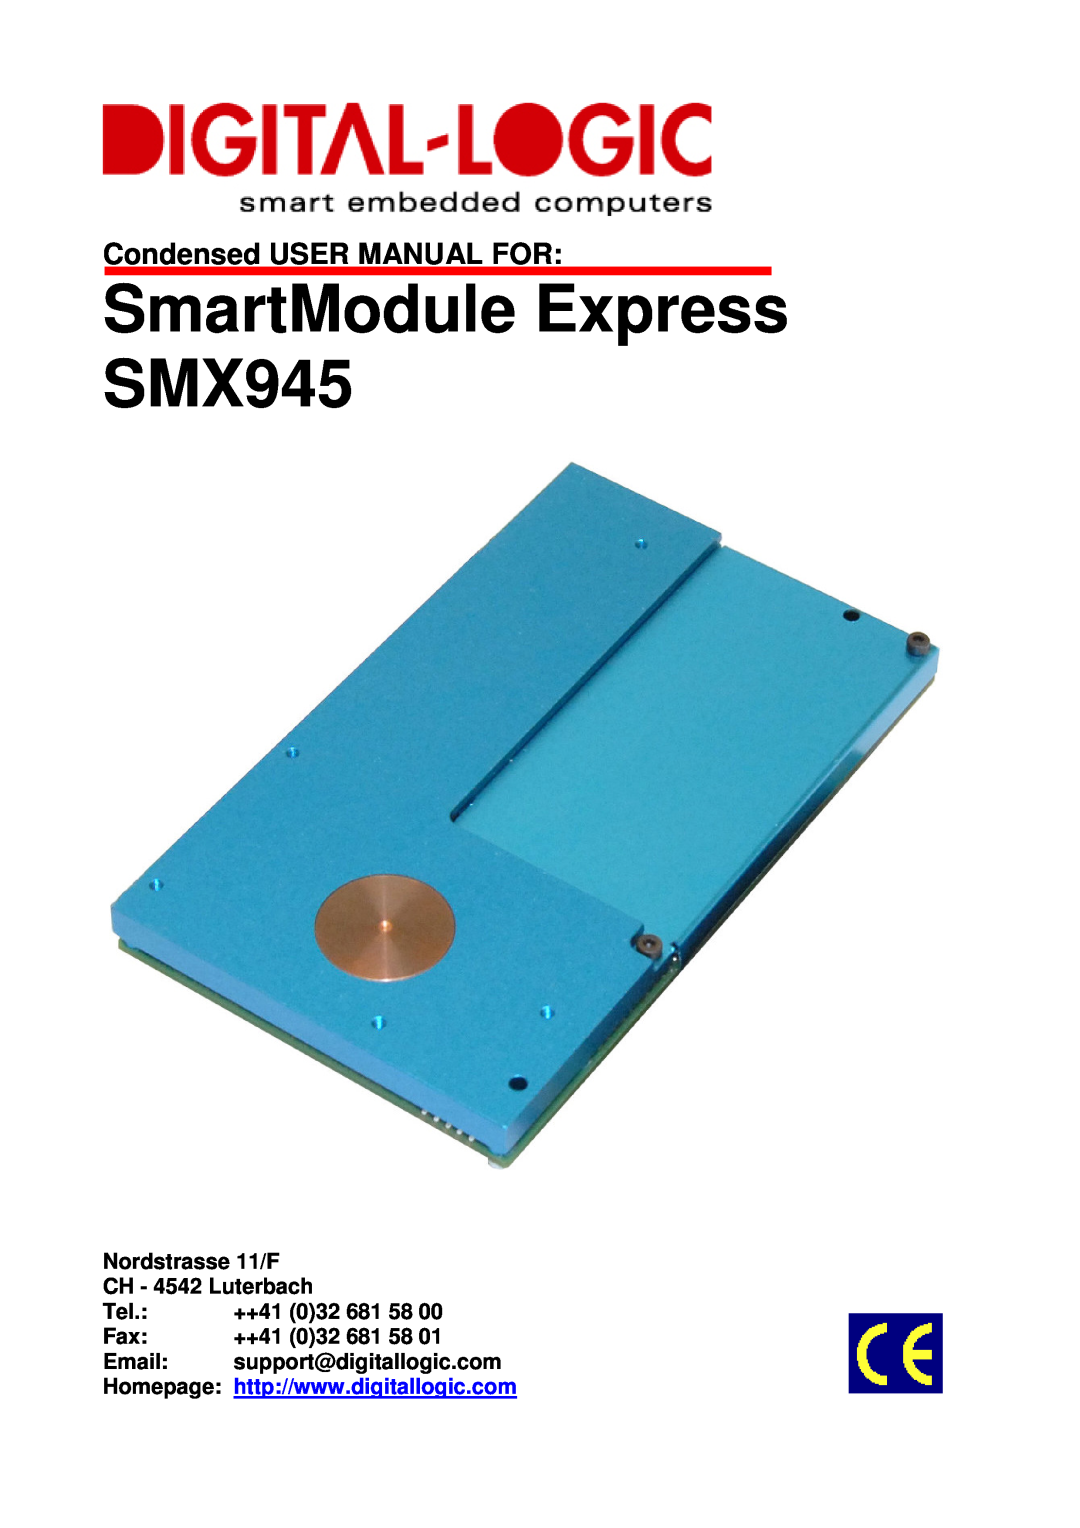 Compaq SMX945 user manual Condensed USER MANUAL FOR, Nordstrasse 11/F CH - 4542 Luterbach, ++41 032 681 58, Email 